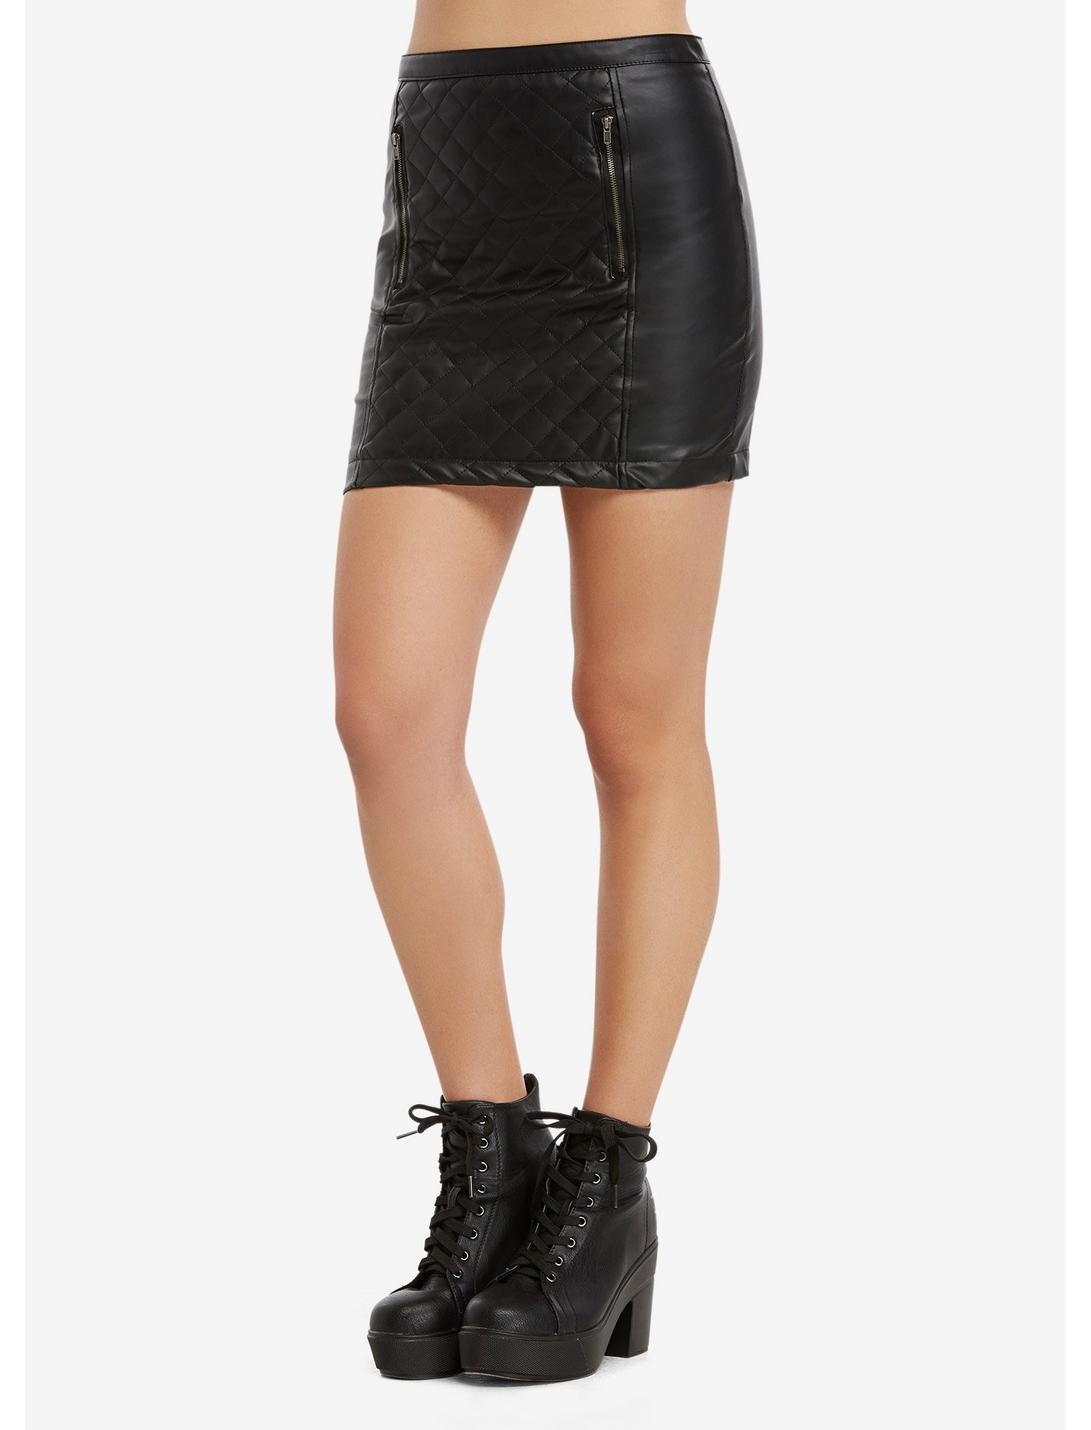 Faux Leather Quilted Zipper Skirt, BLACK, hi-res